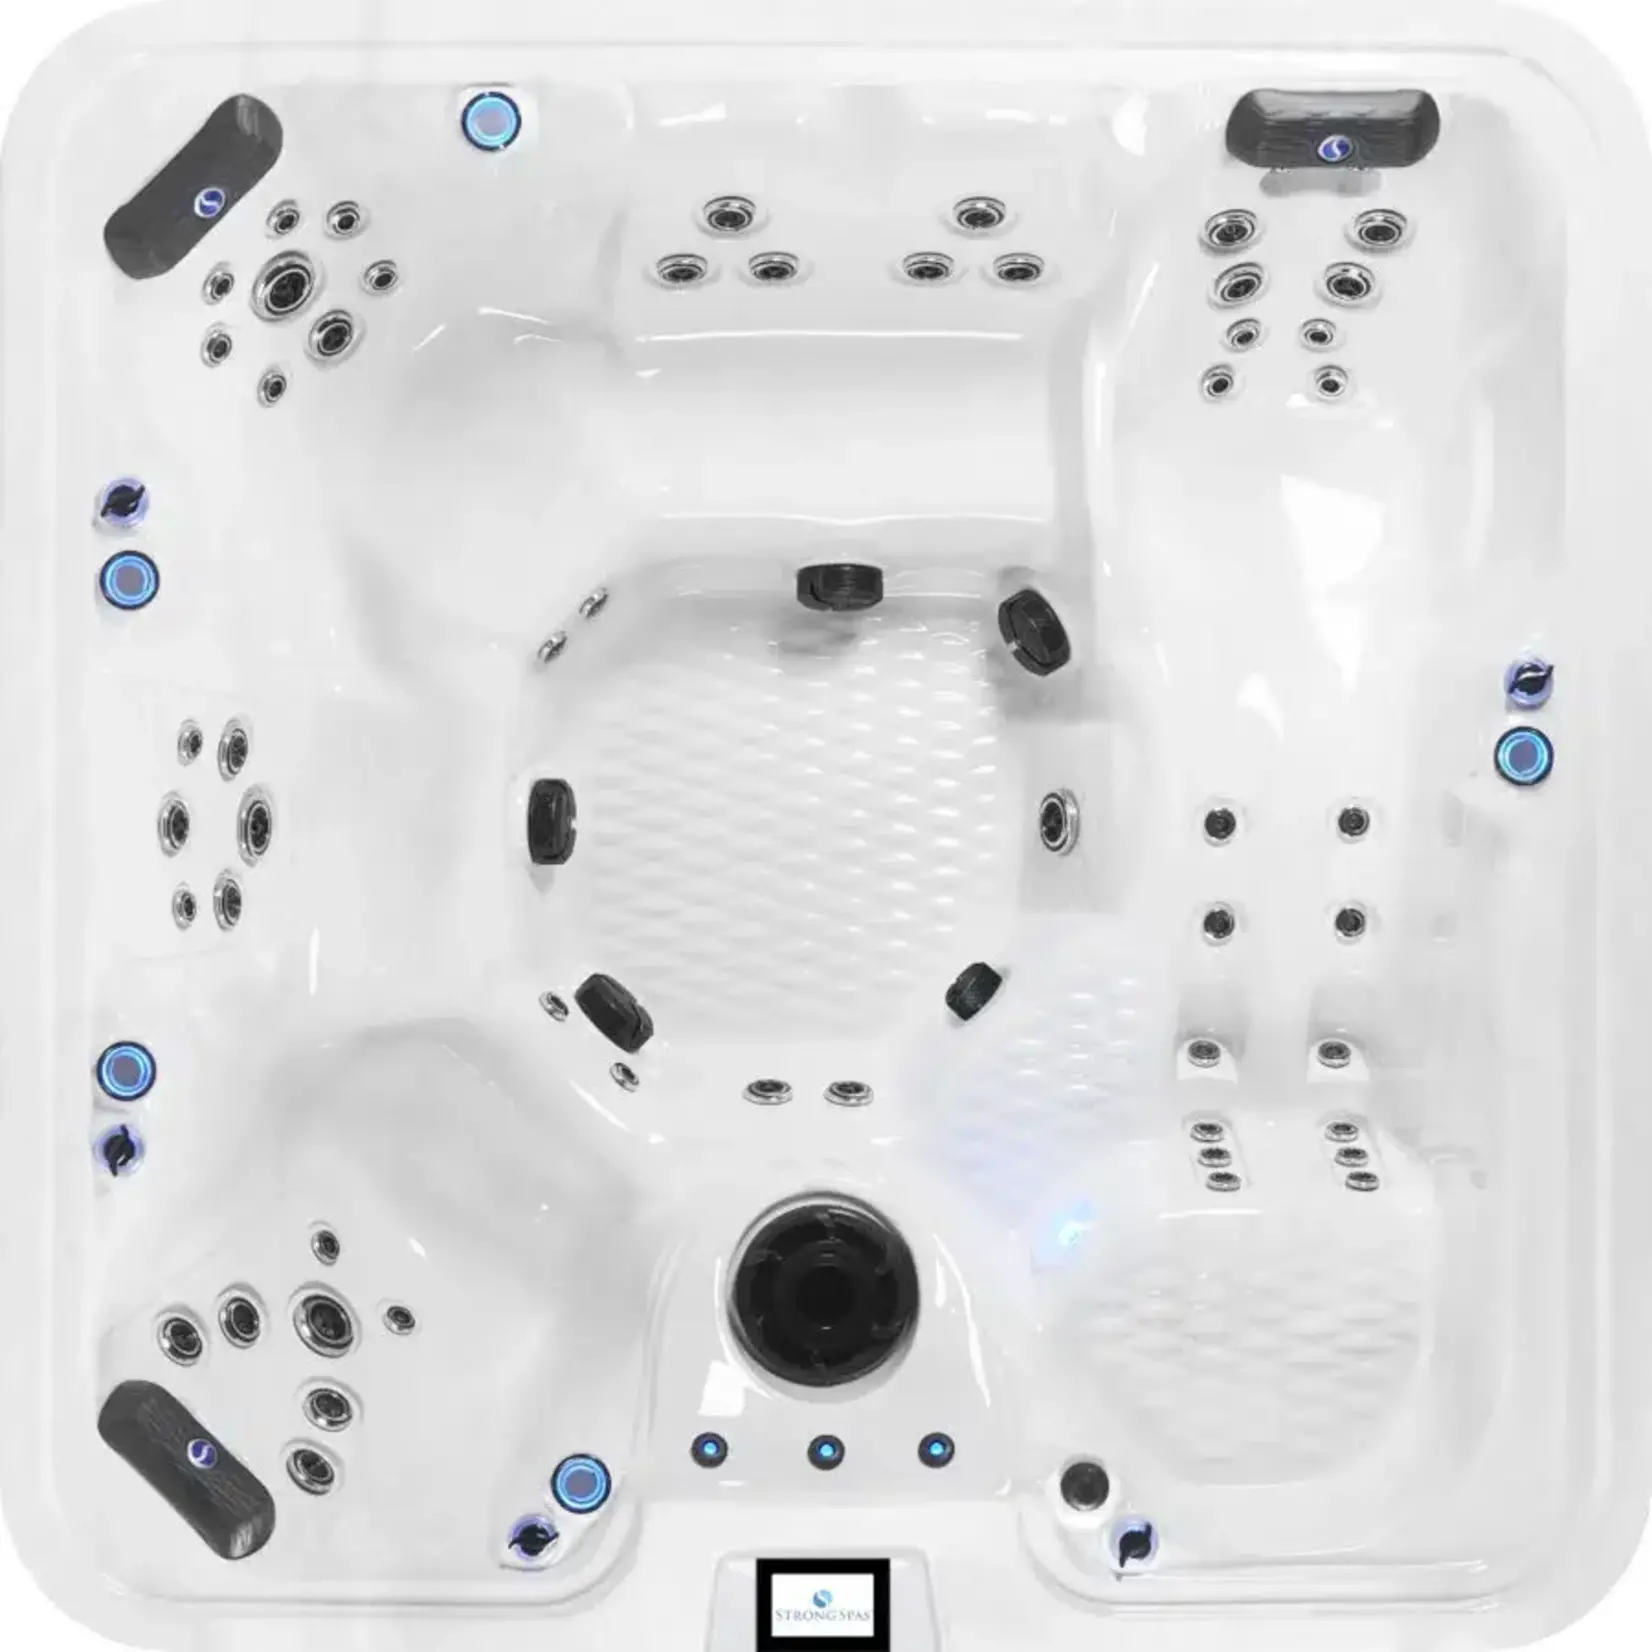 STRONG SPAS SUMMIT SERIES / SL60 - and comes with --> ( Dura-shield hard cover, Dura-base, water columns LED lights, exterior cabinet led's led cup holders, spatouch full color touch screen, ozonato